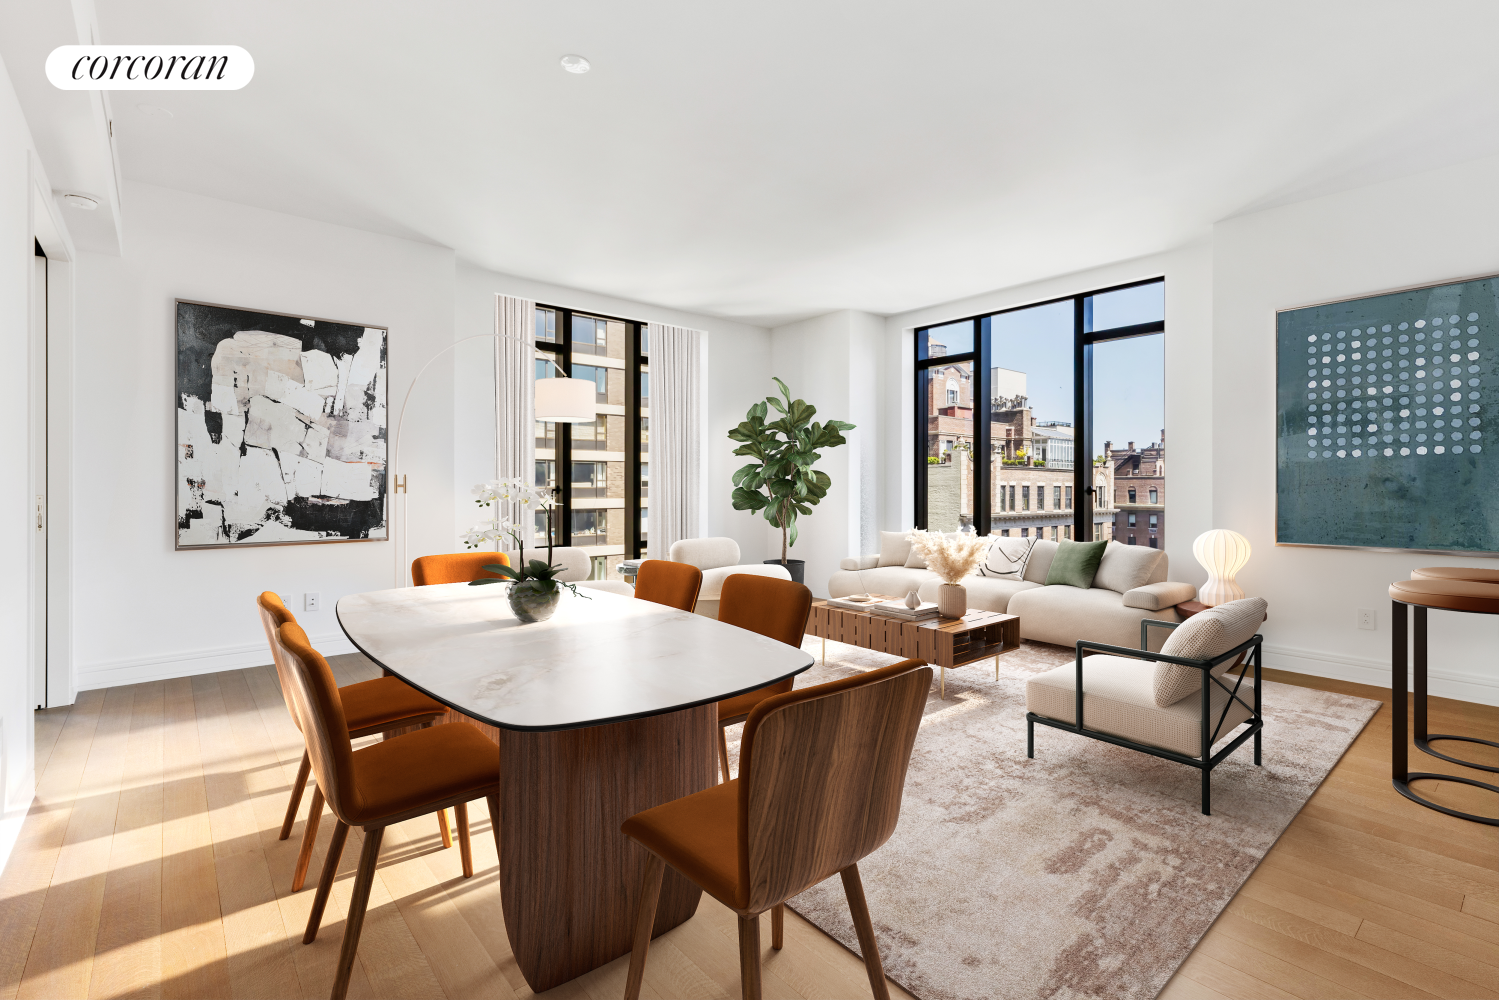 430 East 58th Street 17A, Sutton, Midtown East, NYC - 4 Bedrooms  
3.5 Bathrooms  
6 Rooms - 